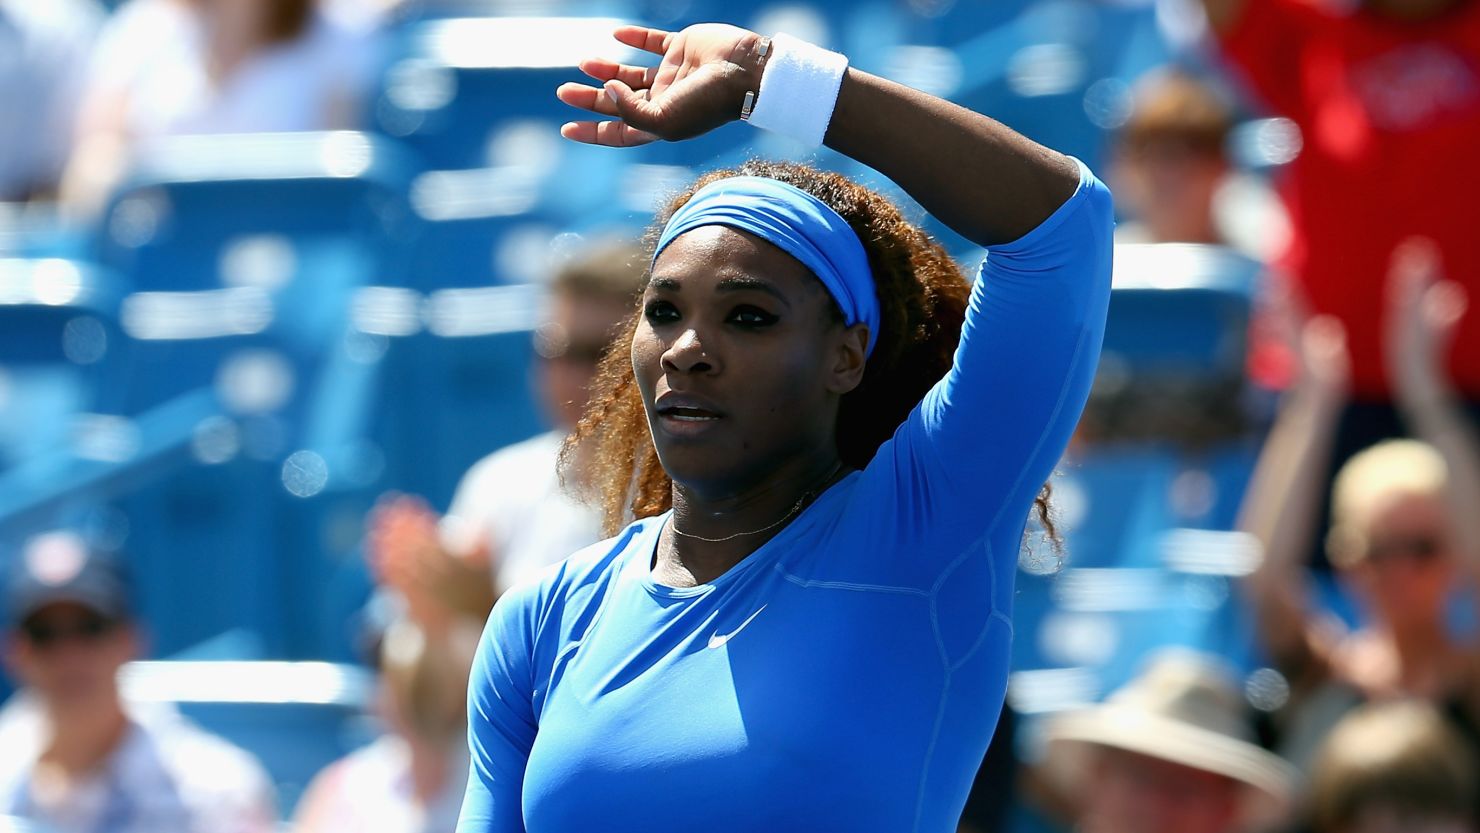 World No. 1 Serena Williams is bidding to win this event for the first time in her career.